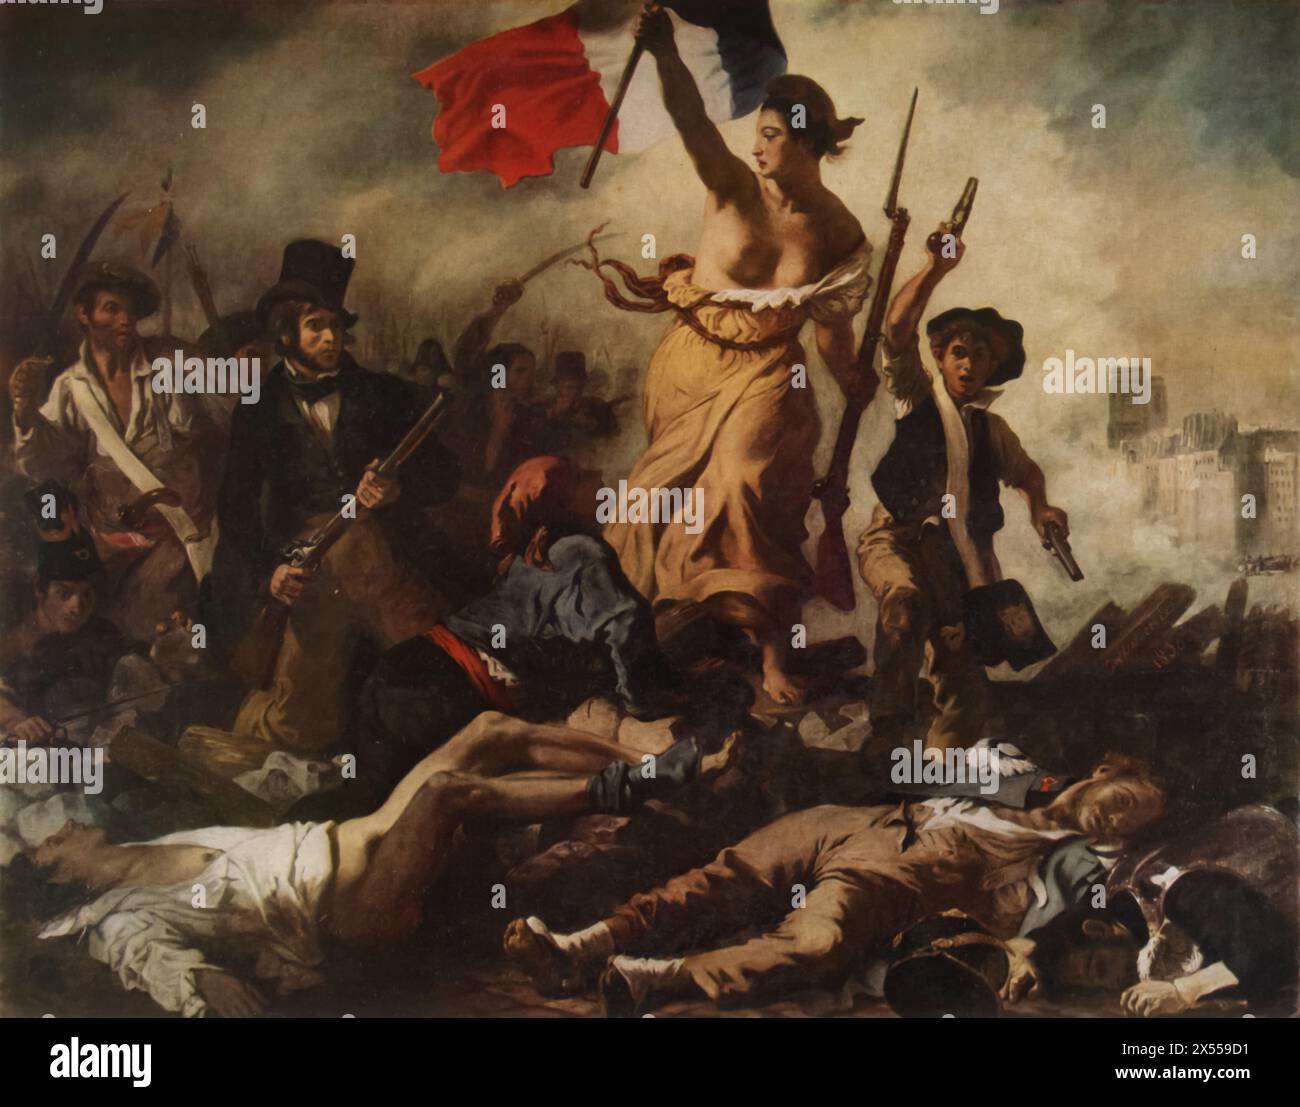 Liberty Leading the People' by Eugène Delacroix, painted in 1830, housed at the Louvre Museum, Paris, France. This iconic painting commemorates the July Revolution of 1830 in France. It features the allegorical figure of Liberty personified as a woman leading a charge against the oppressive forces, symbolizing the fight for freedom. Stock Photo